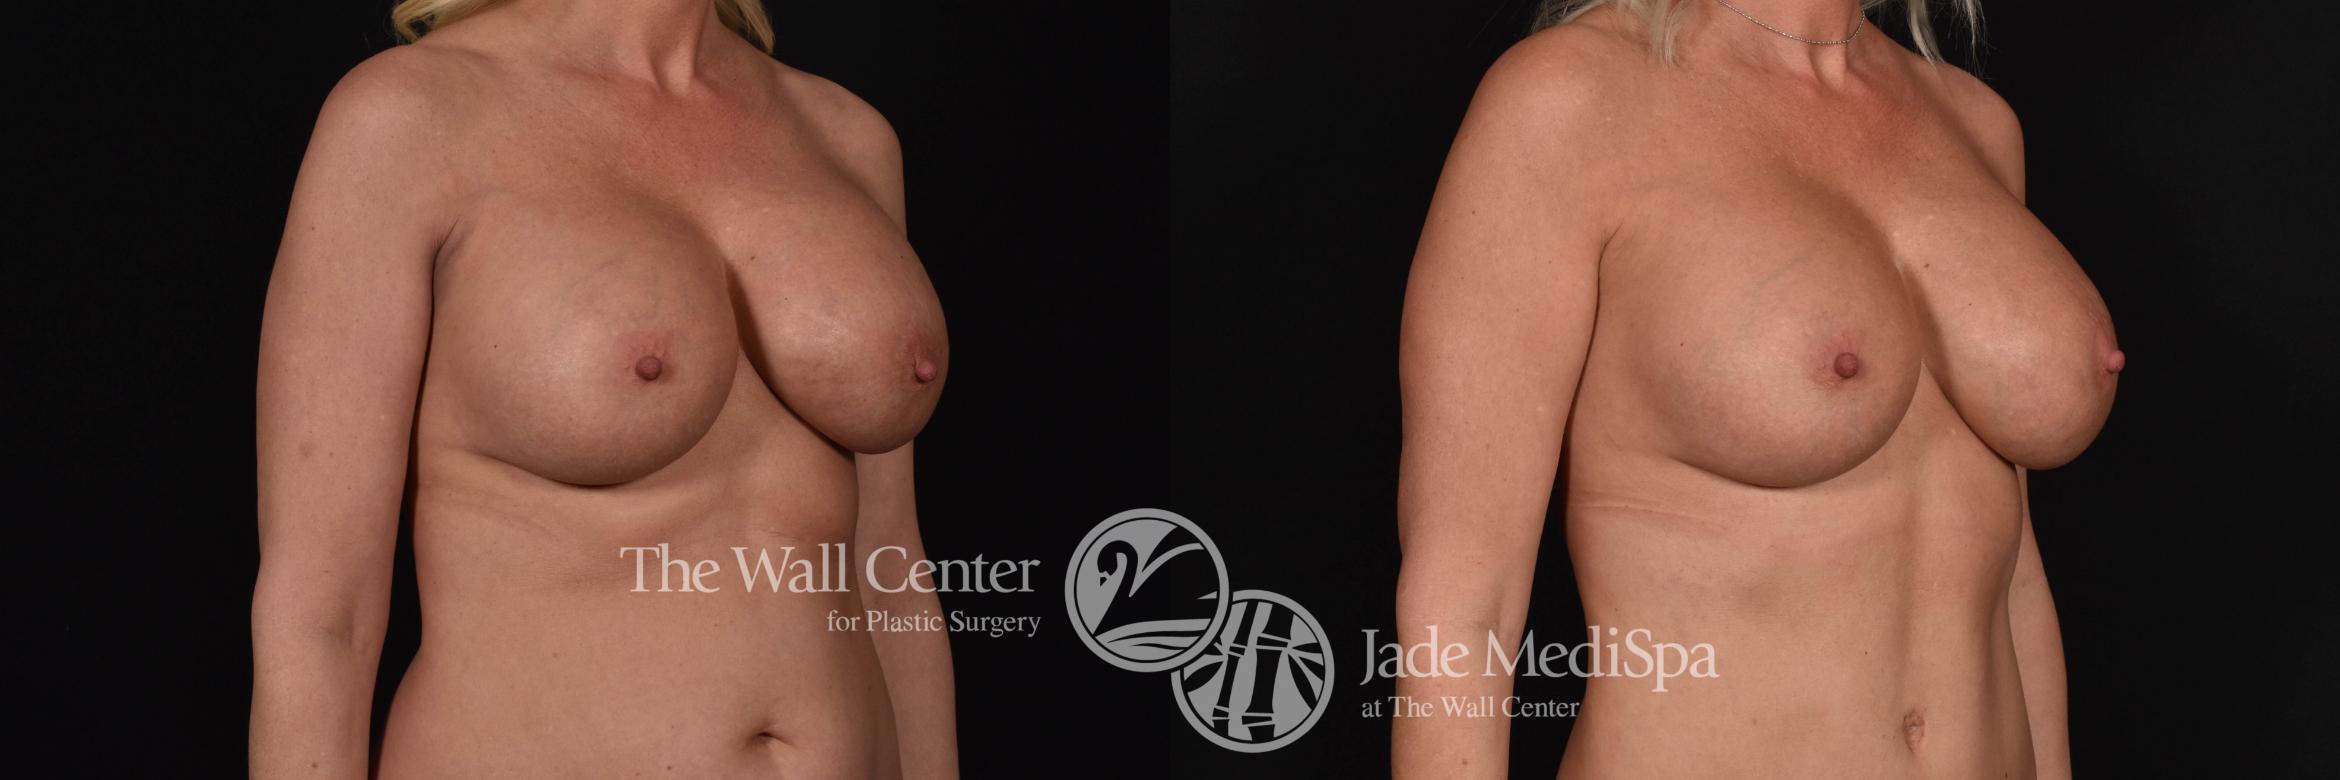 Breast Implant Exchange Right Oblique Photo, Shreveport, Louisiana, The Wall Center for Plastic Surgery, Case 866